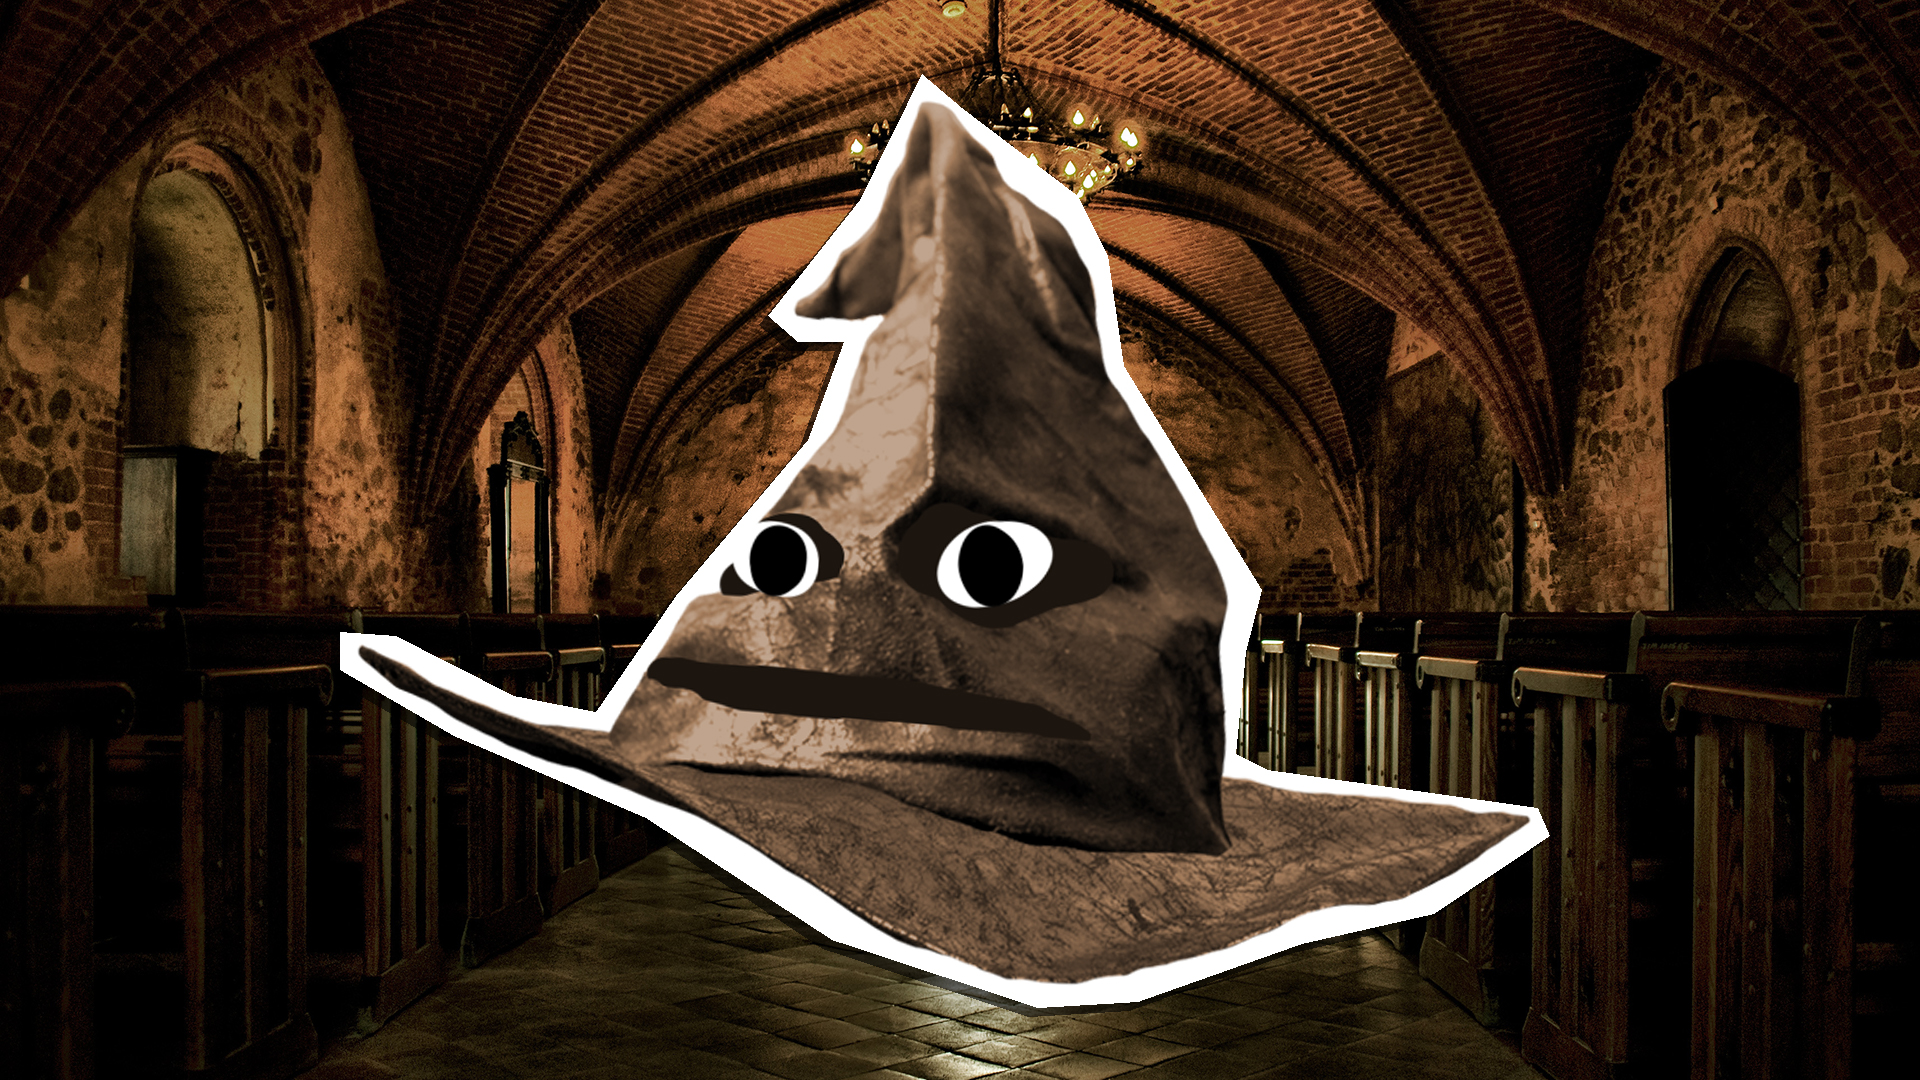 A sorting hat